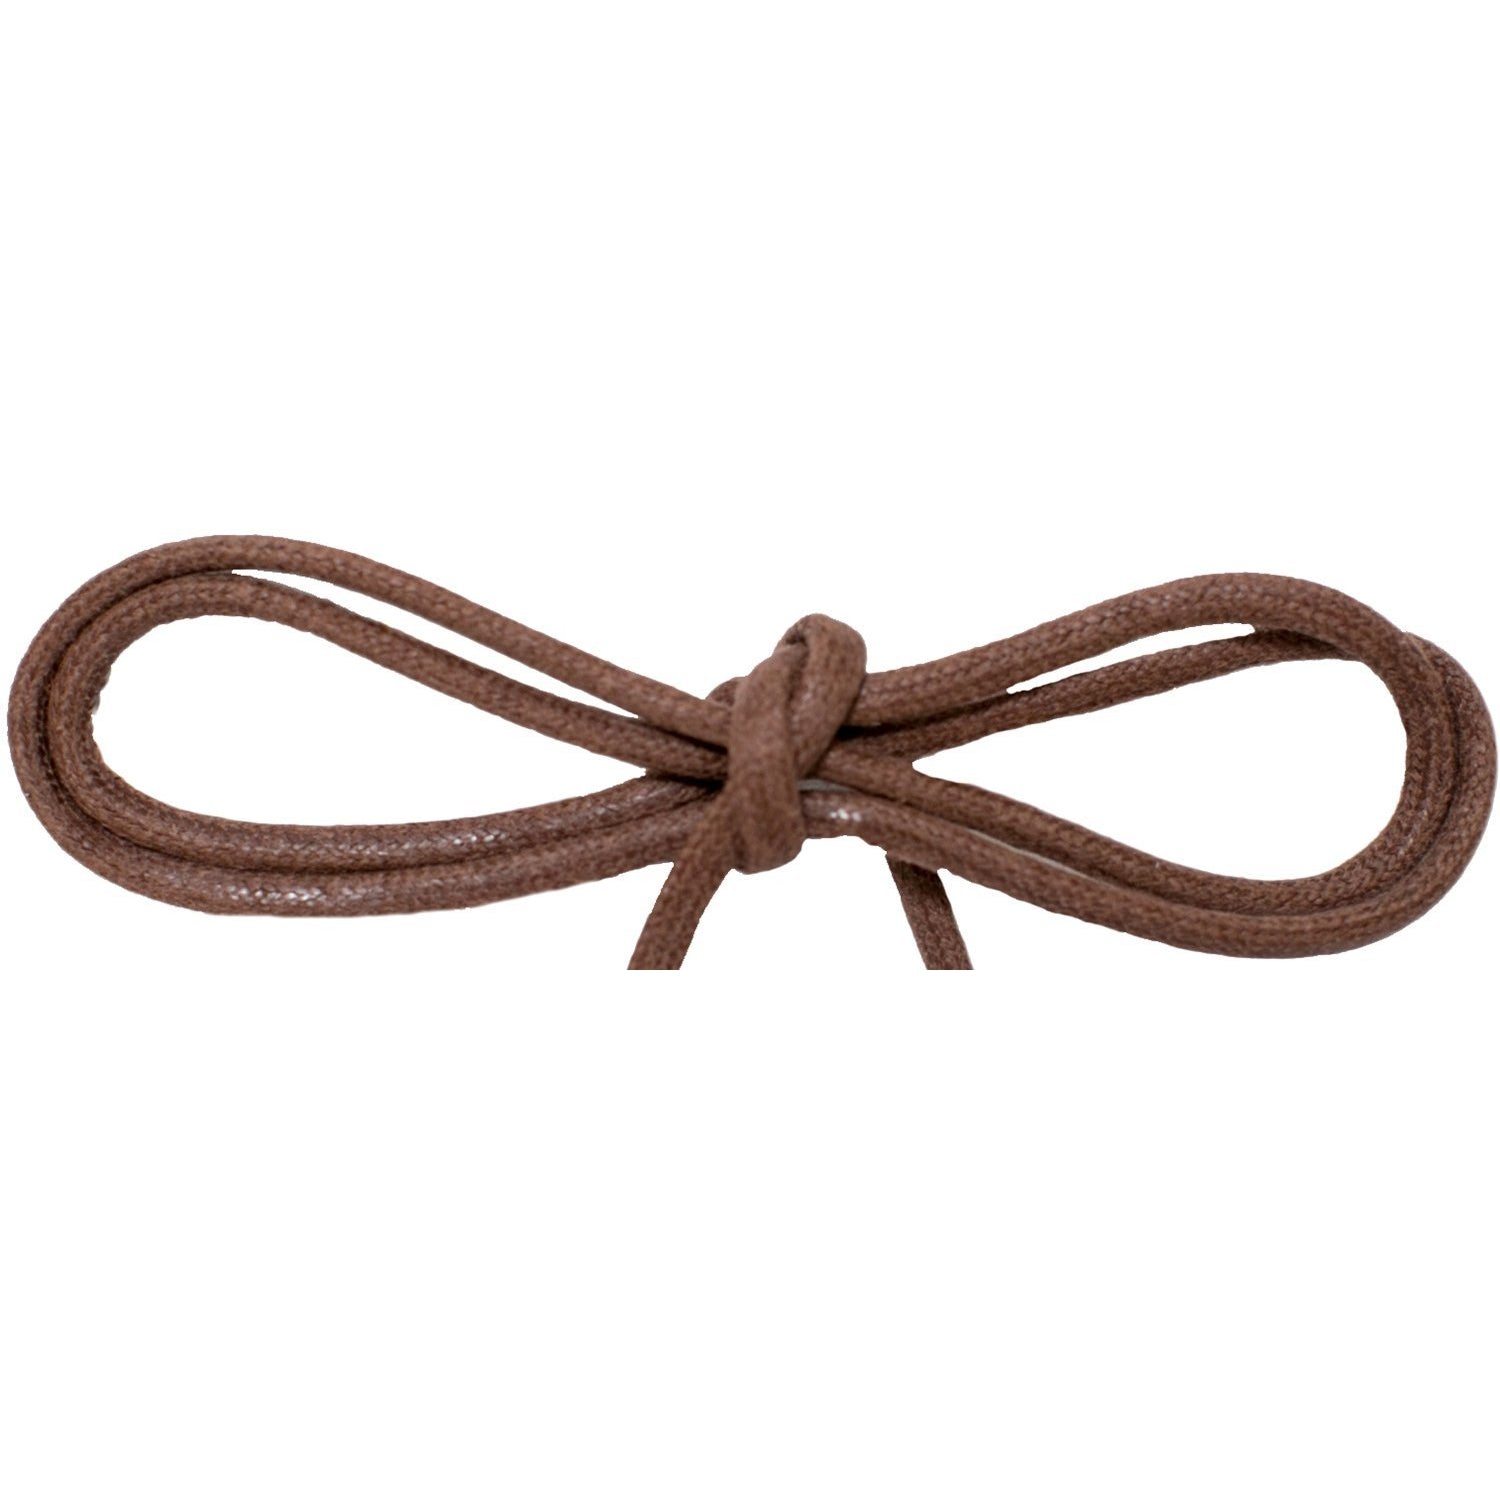 Wholesale Waxed Cotton Thin Round DRESS Laces 1/8'' - Brown (12 Pair Pack) Shoelaces